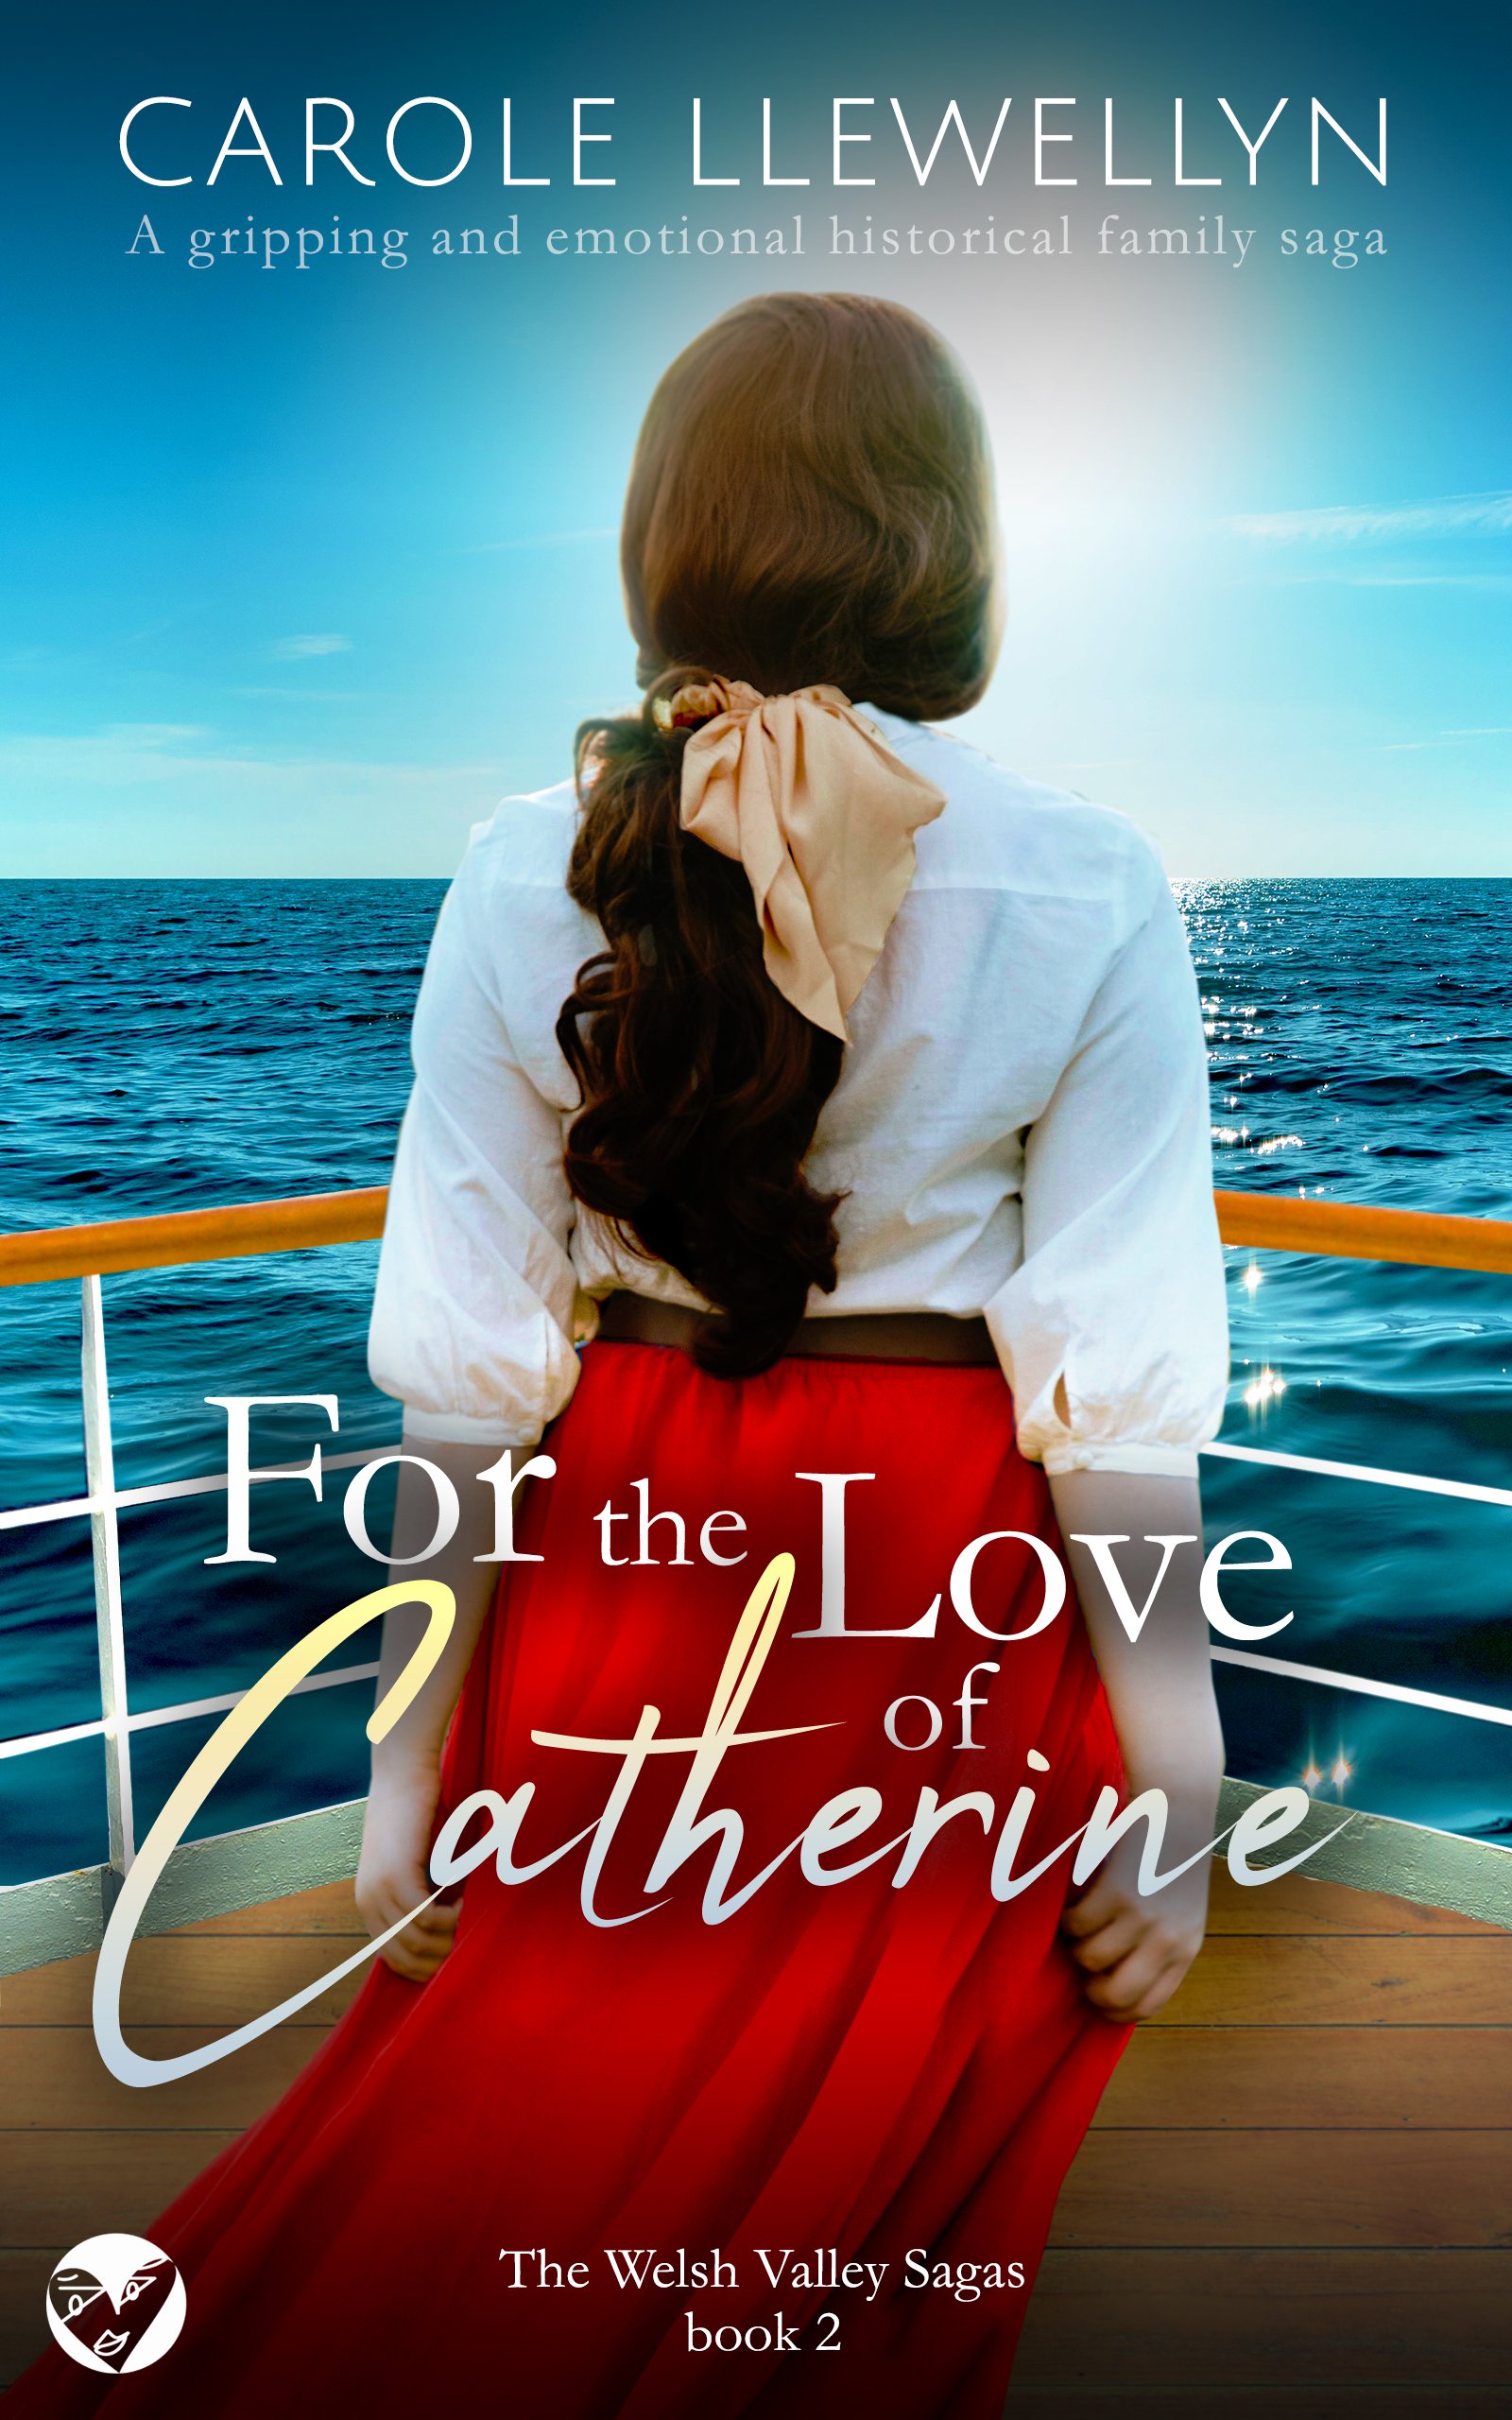 FOR THE LOVE OF CATHERINE Cover publish.jpg